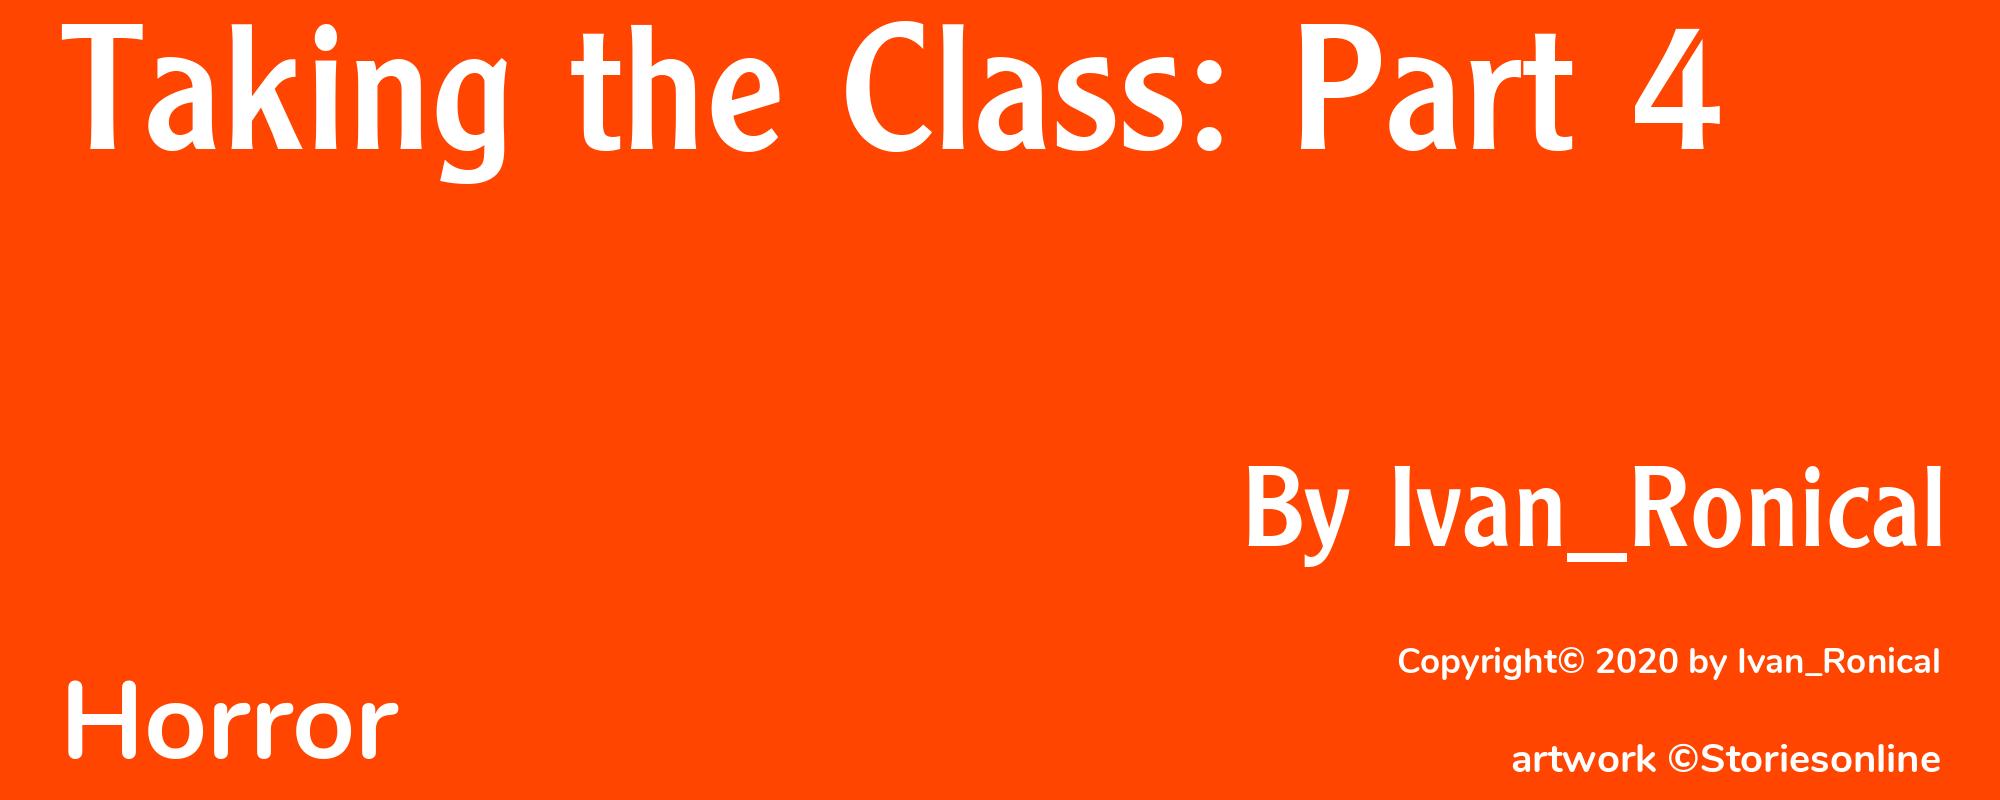 Taking the Class: Part 4 - Cover